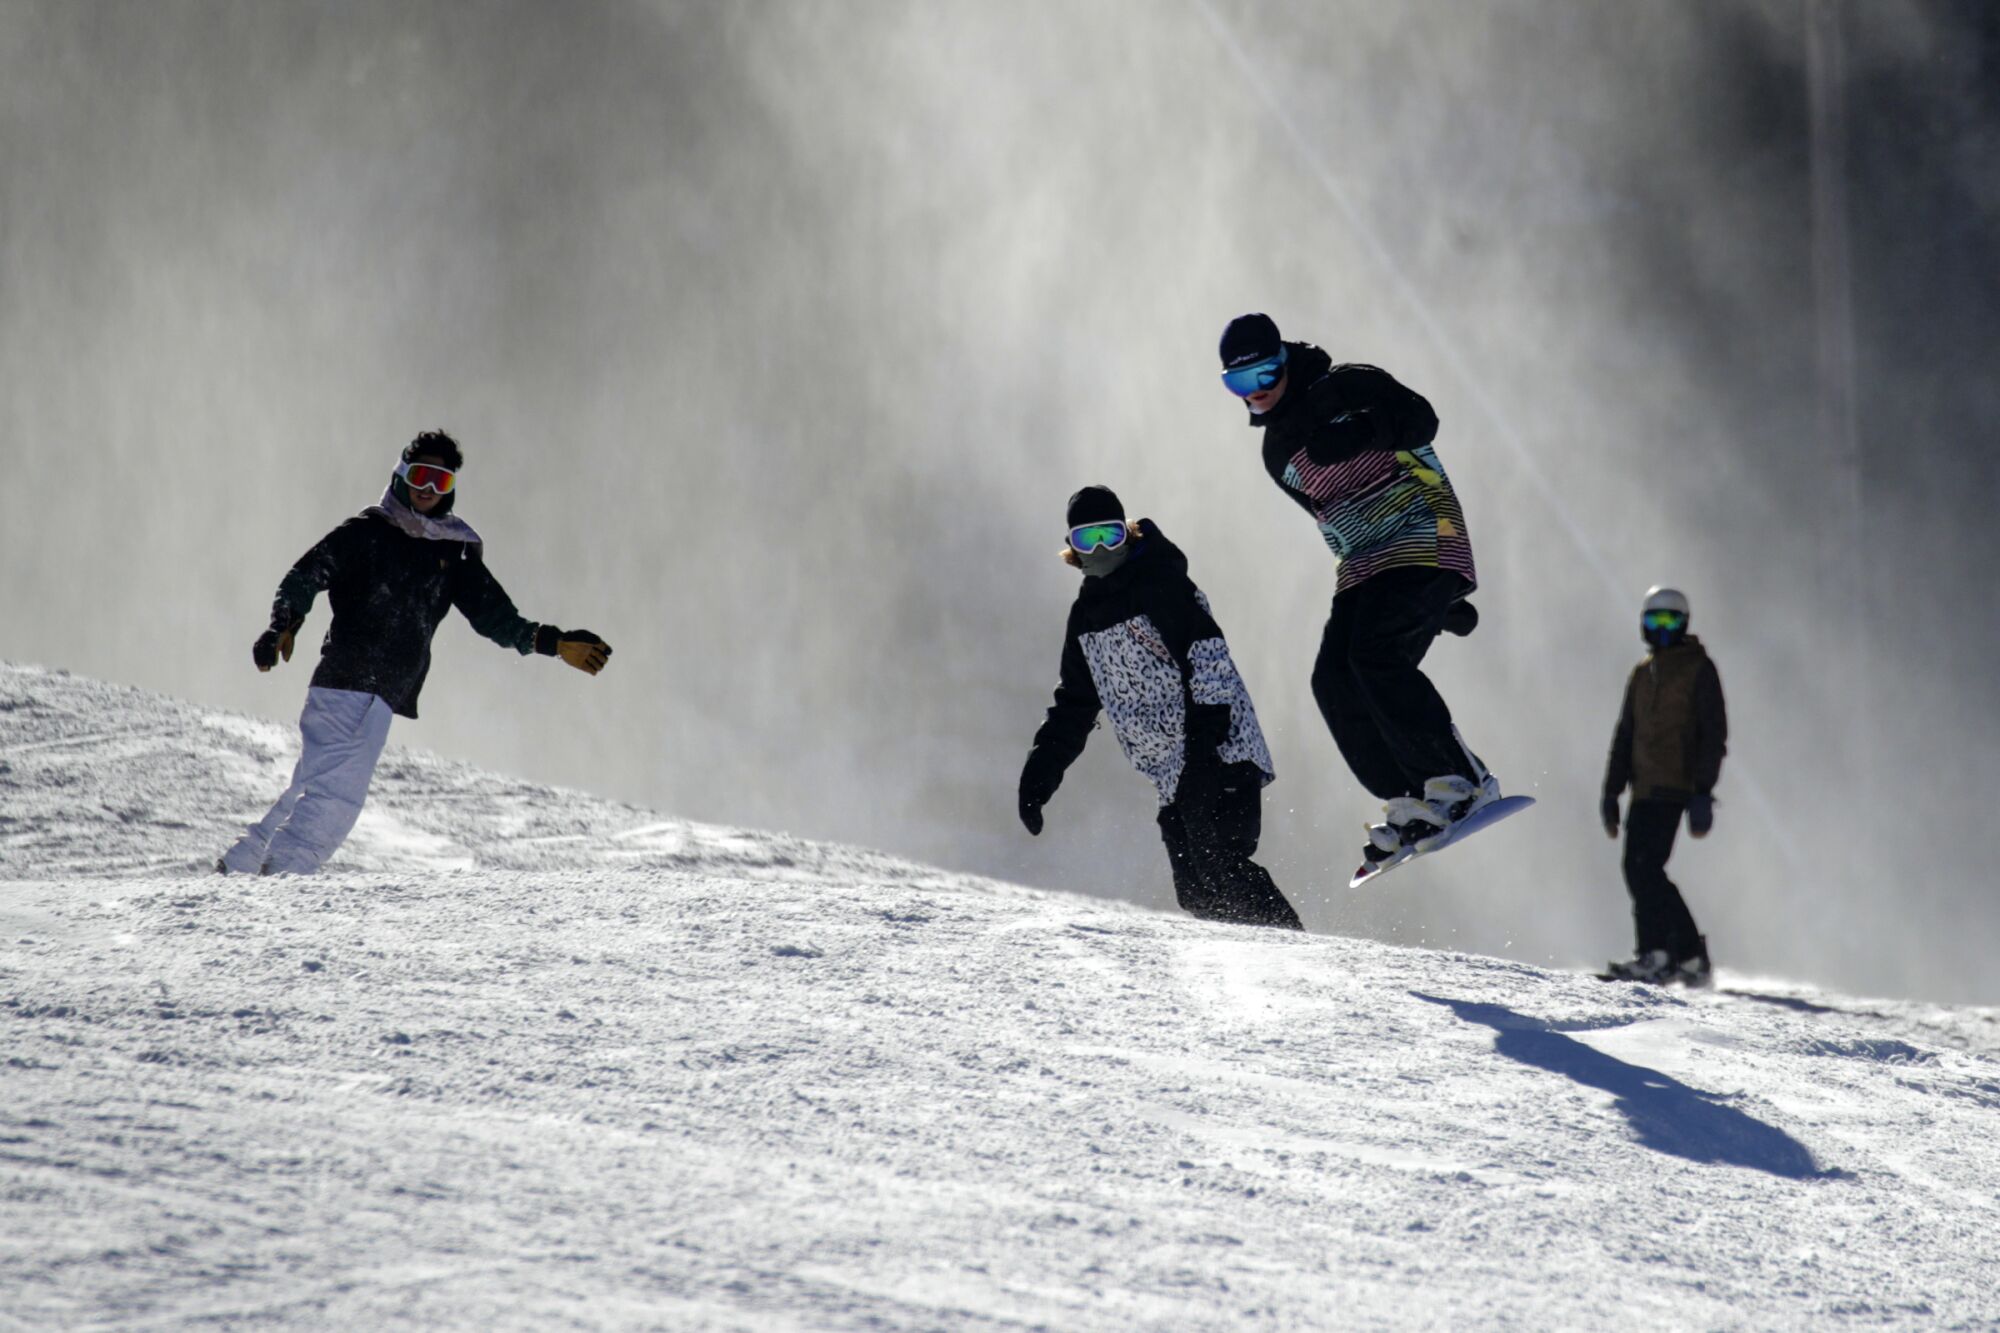 Snow boarders enjoy fresh powder at Mountain High in Wrightwood.